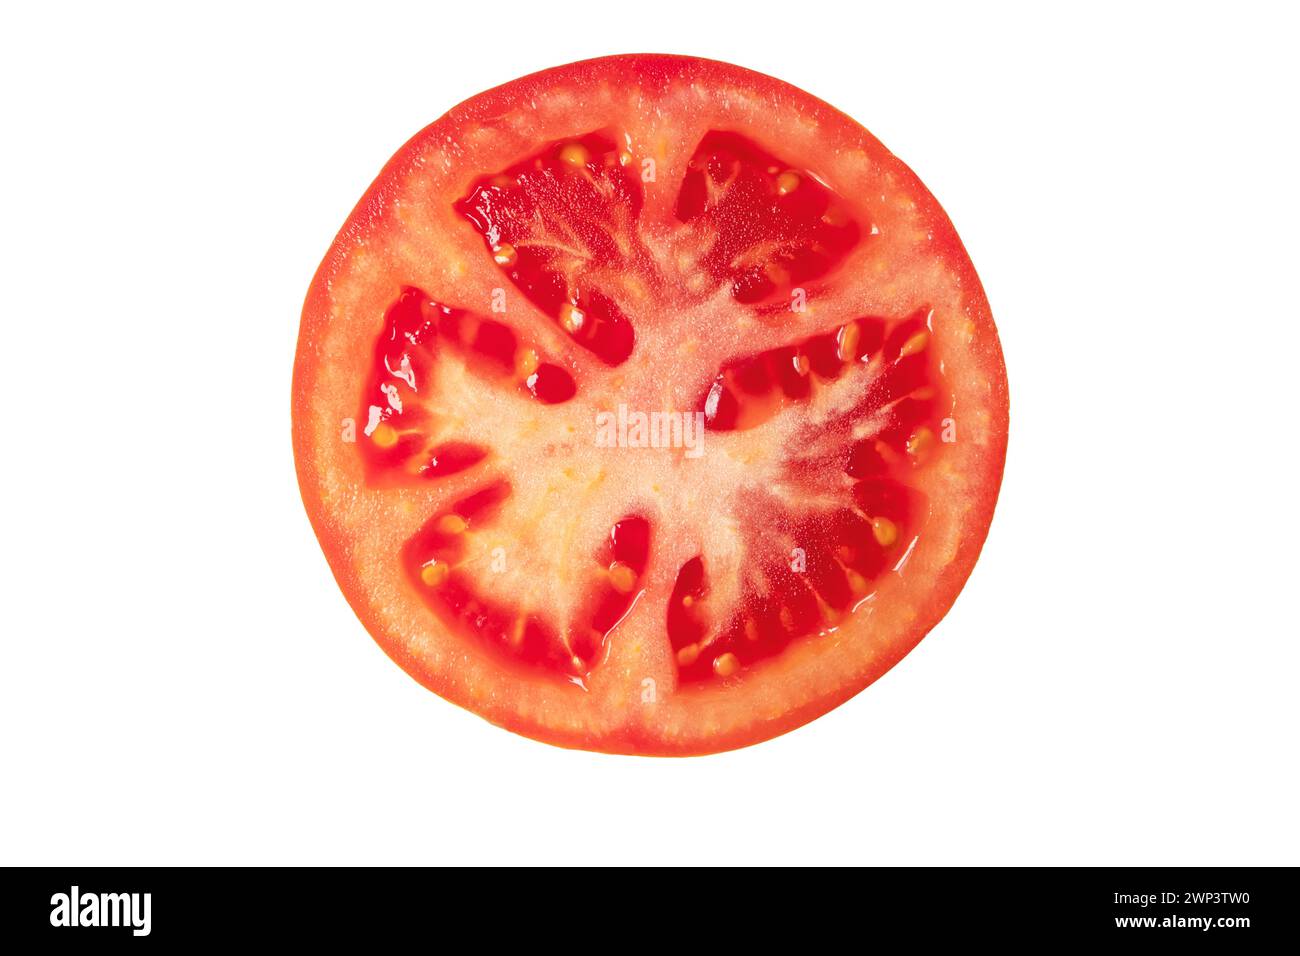 Tomato slice top view isolated on white. Sandwich filler ingredient. Juicy vegetable for hamburger. Meaty fruit with small seed cavities. Stock Photo